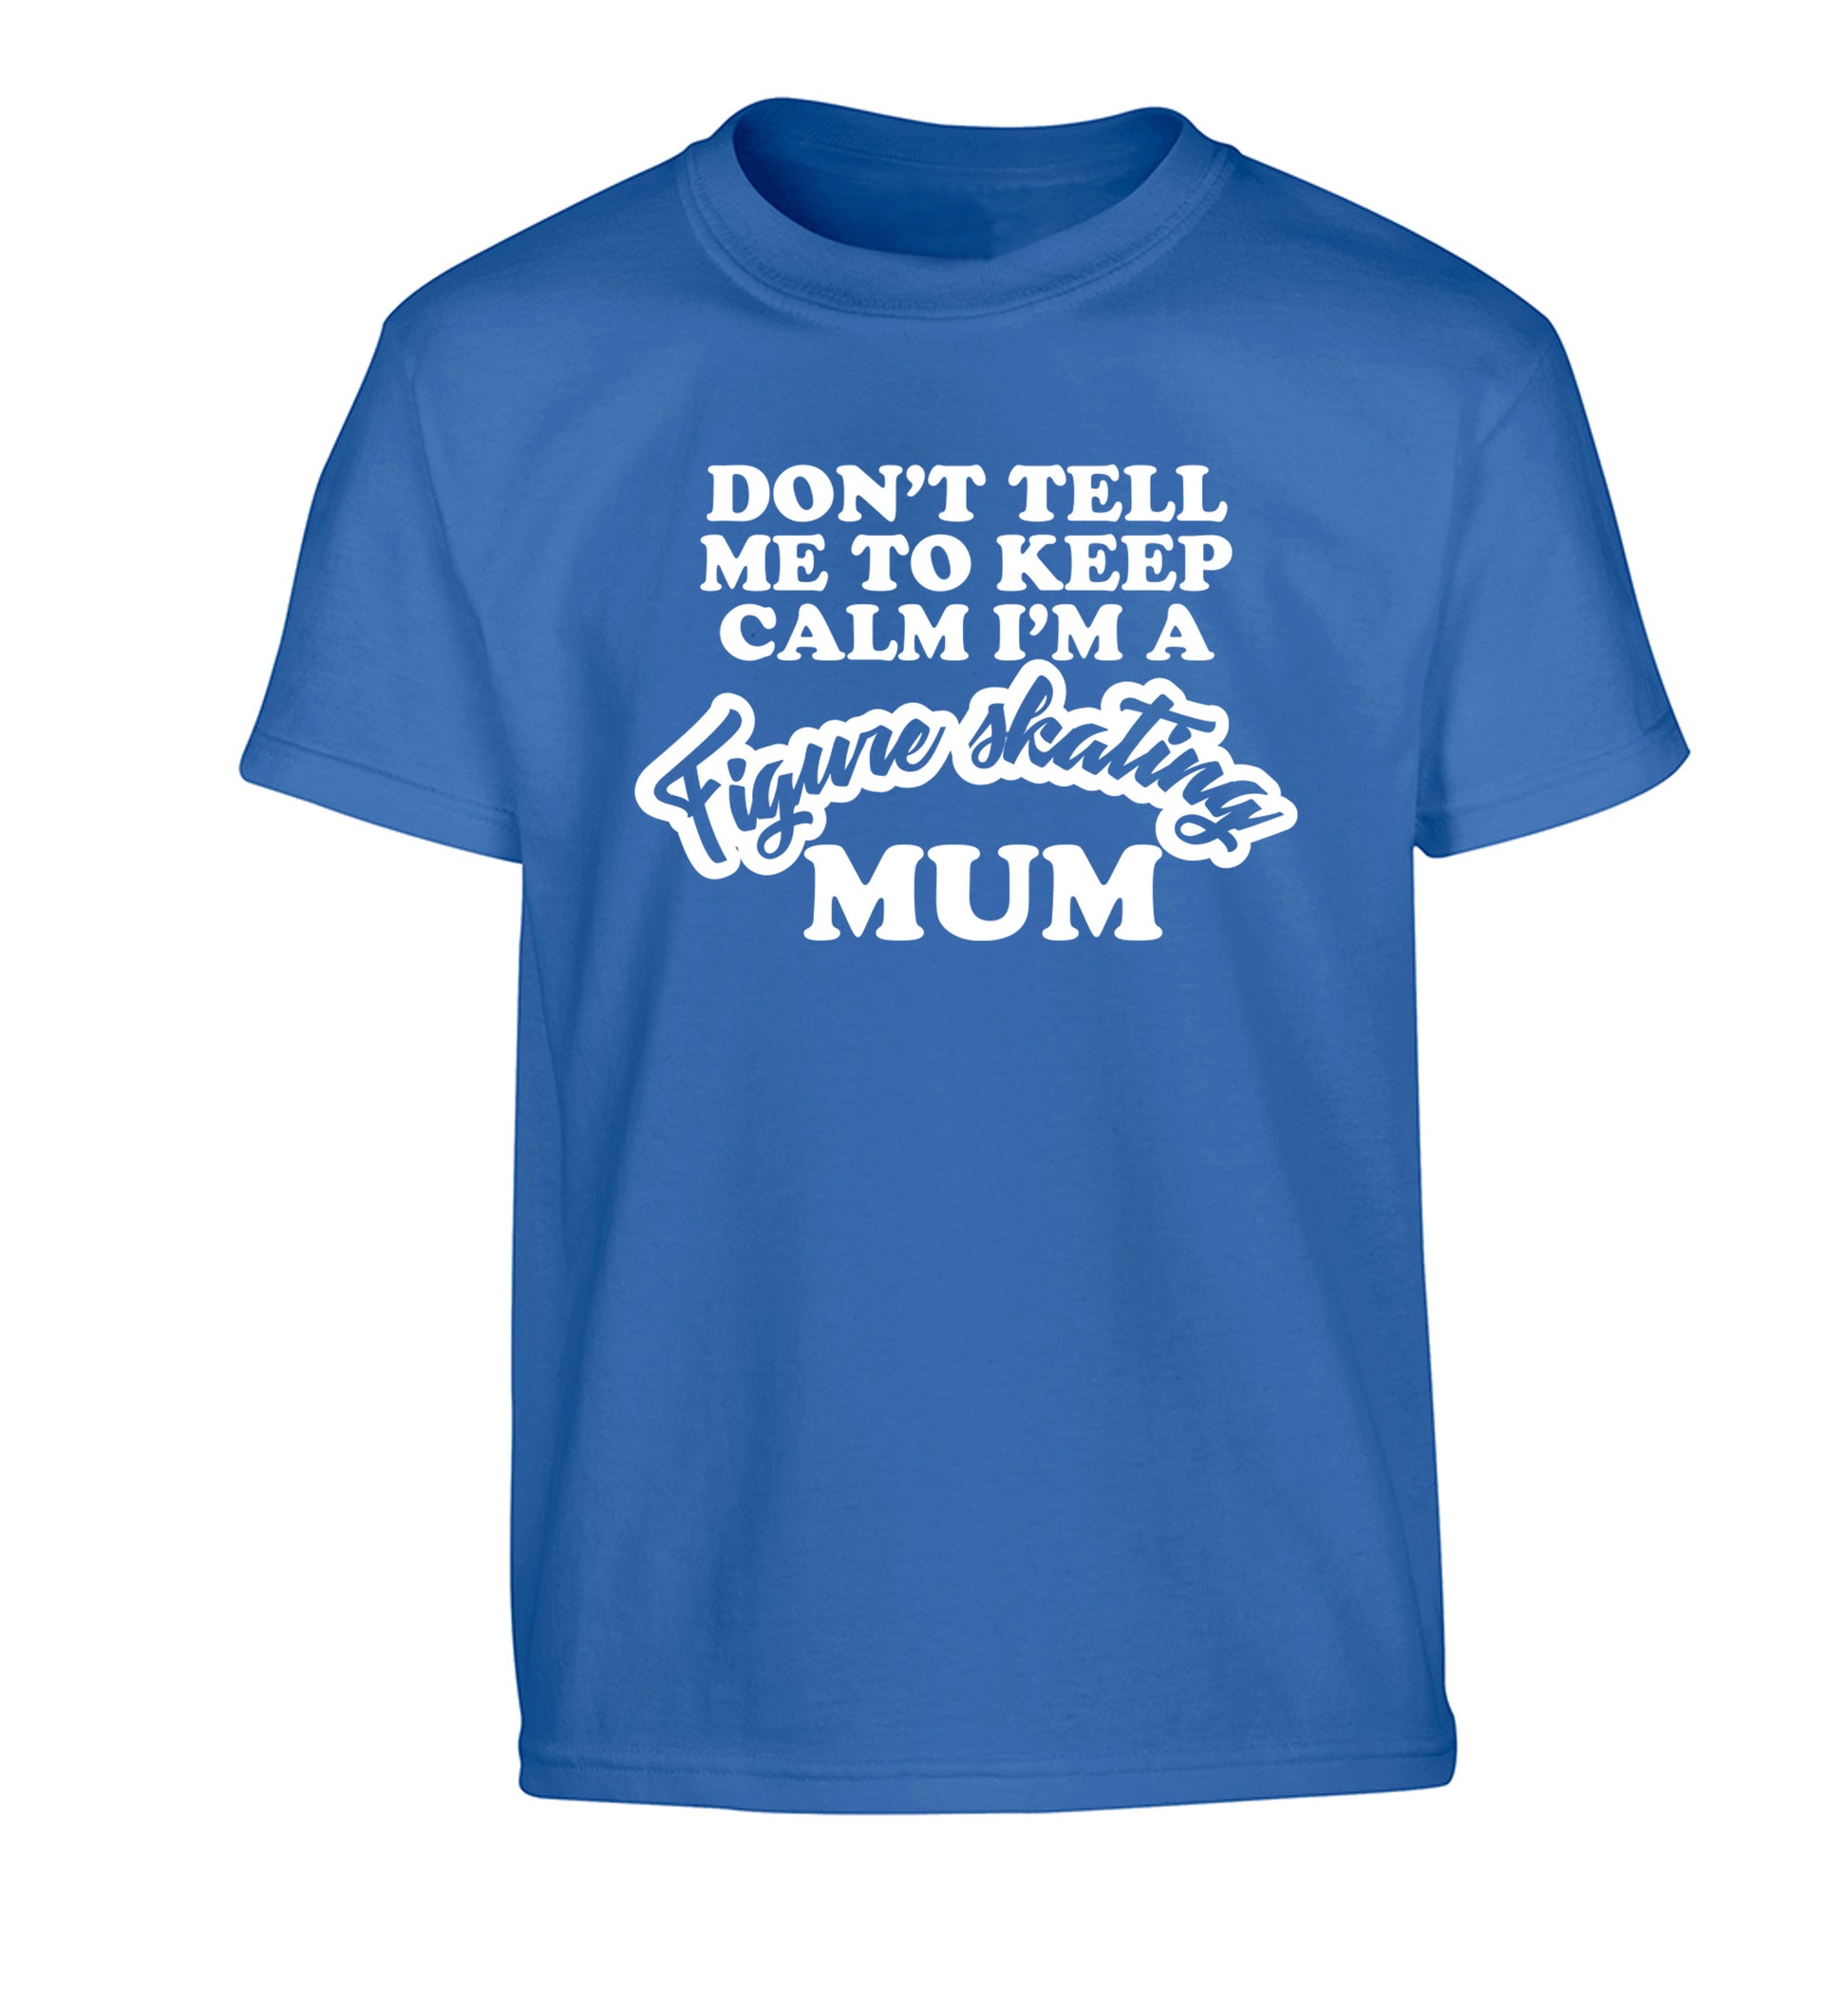 Don't tell me to keep calm I'm a figure skating mum Children's blue Tshirt 12-14 Years